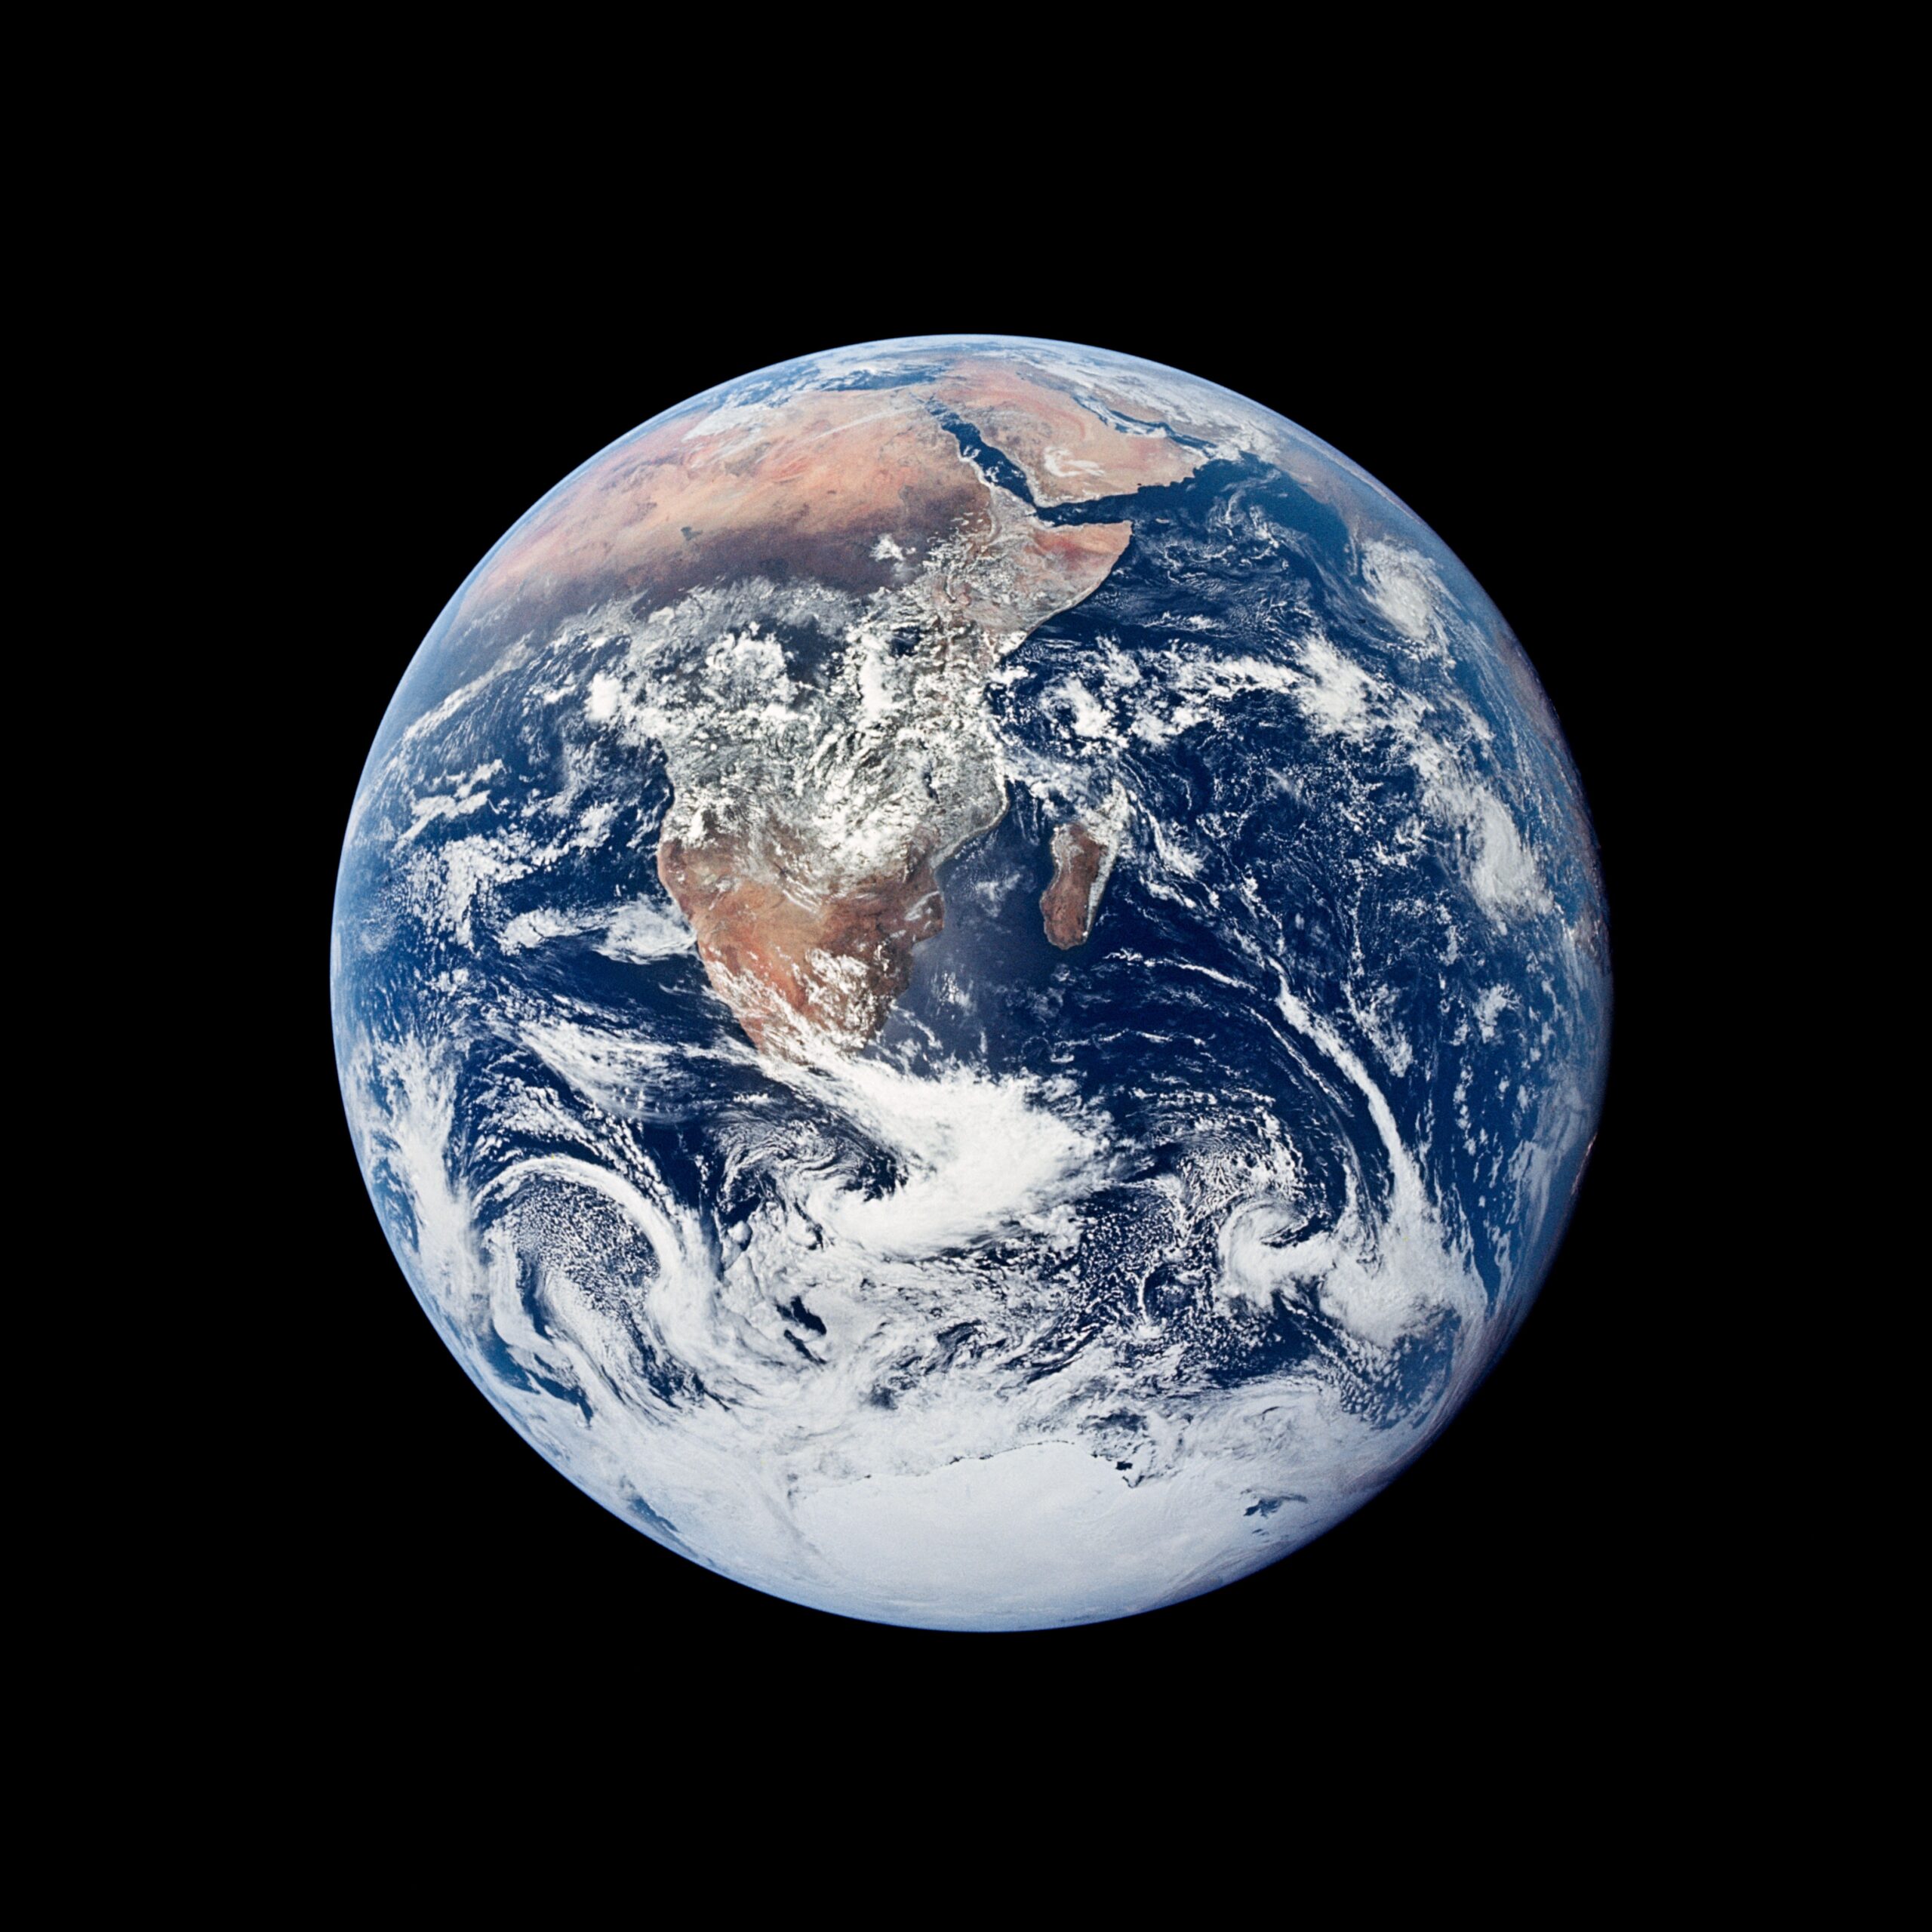 The Earth in full profile from space, resembling a blue marble.